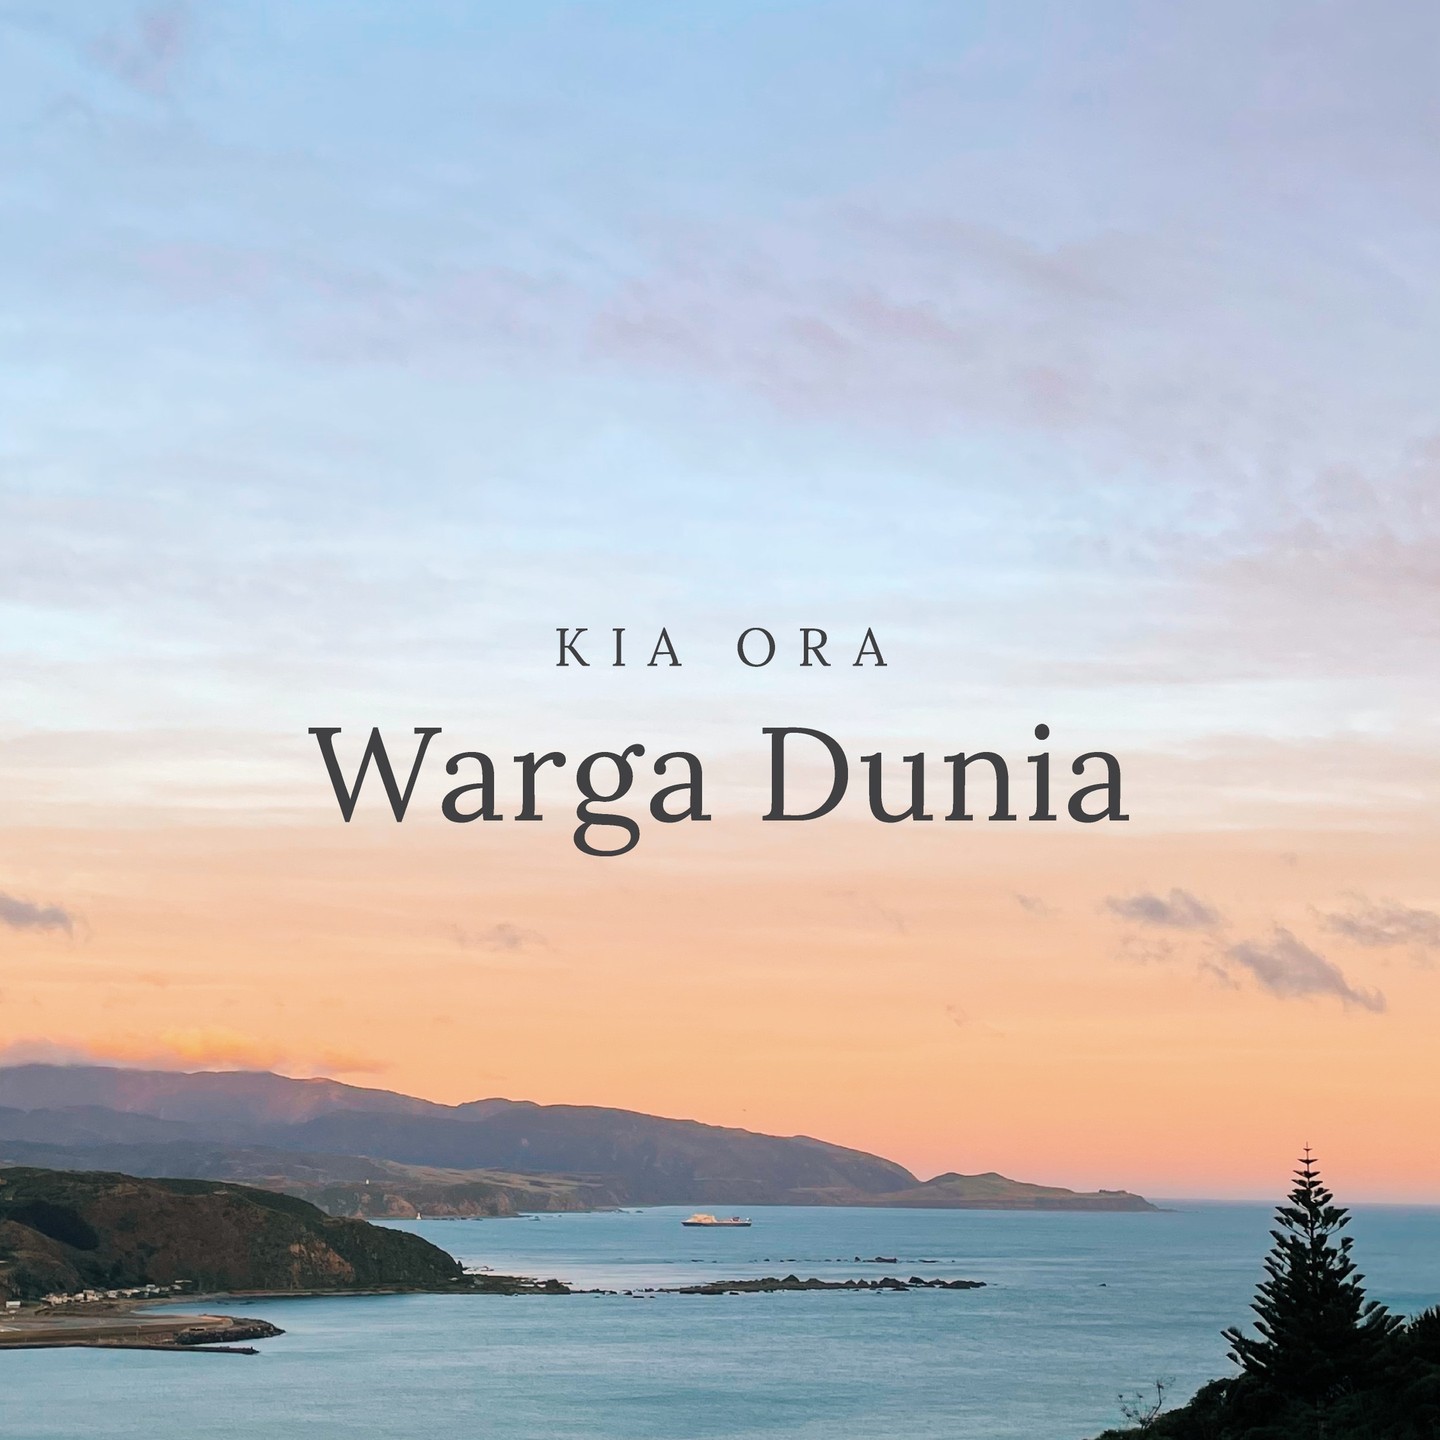 [LINK ON BIO]⁠
⁠
Hosted by three Indonesian. @wargaduniaofficial is a podcast where Indonesian who live overseas share their lifestyle and daily lives wherever they are. The content has also covered their passion for traveling, hobbies, and stories yet entertaining.⁠
⁠
In this episode, I am sharing my experience and life story as a Kiwi (New Zealander) in Wellington, the southernmost capital in the world.⁠
⁠
Indonesian only.⁠
⁠
#thepaperandink #wargaduniapodcast